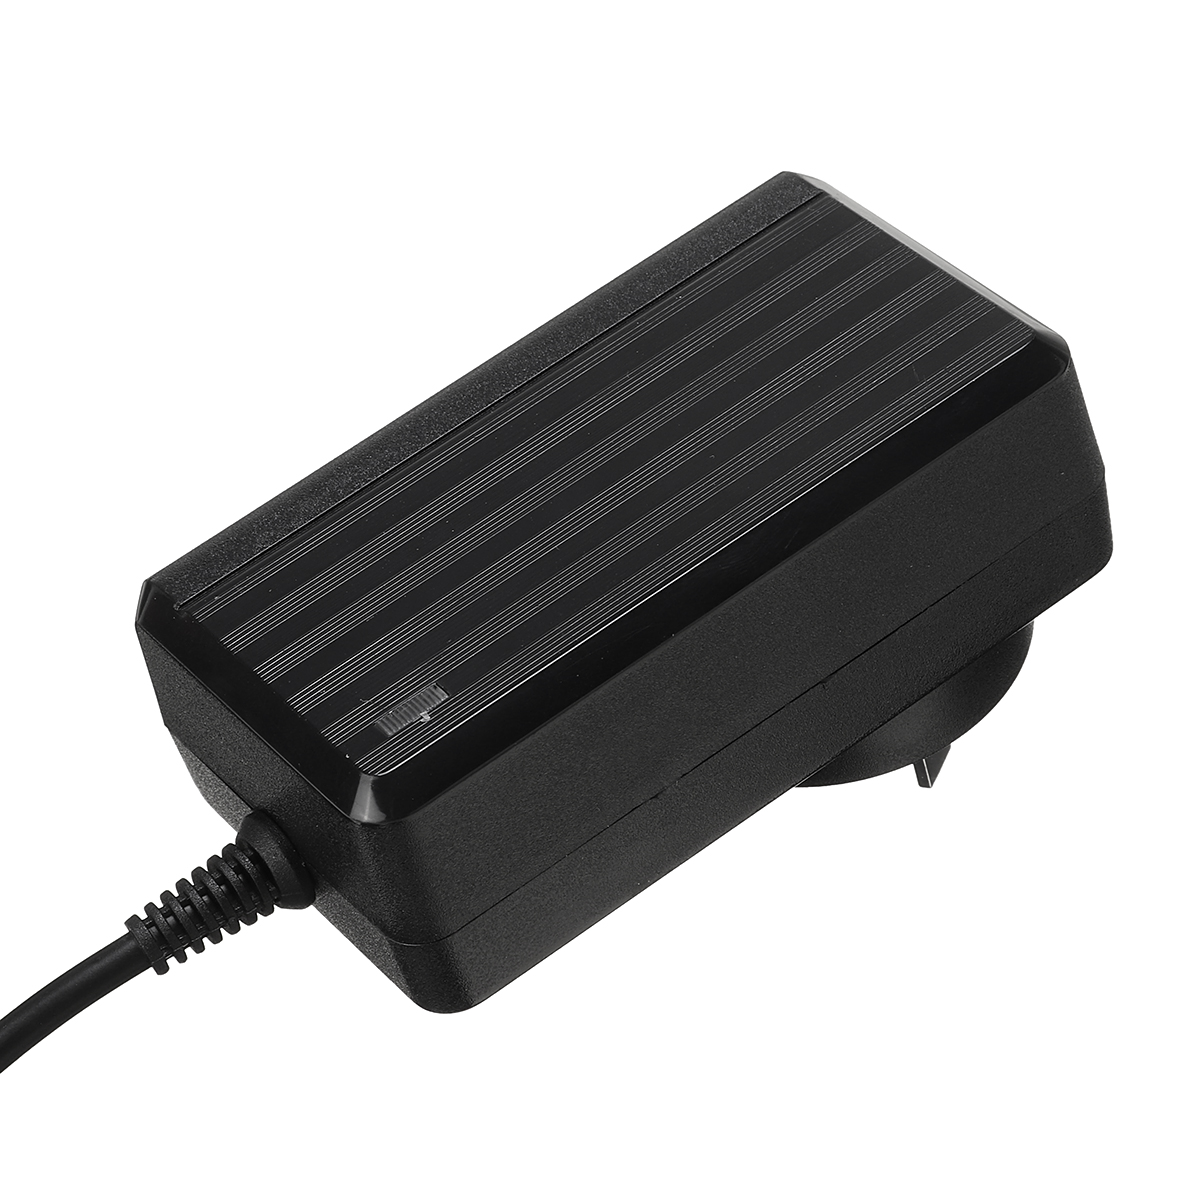 100-240V Battery Charger Power Supply Adapter For Dyson DC30 DC31 DC32 DC33 DC40 DC41 DC42 DC43 DC44 DC45 DC55 DC56 DC57